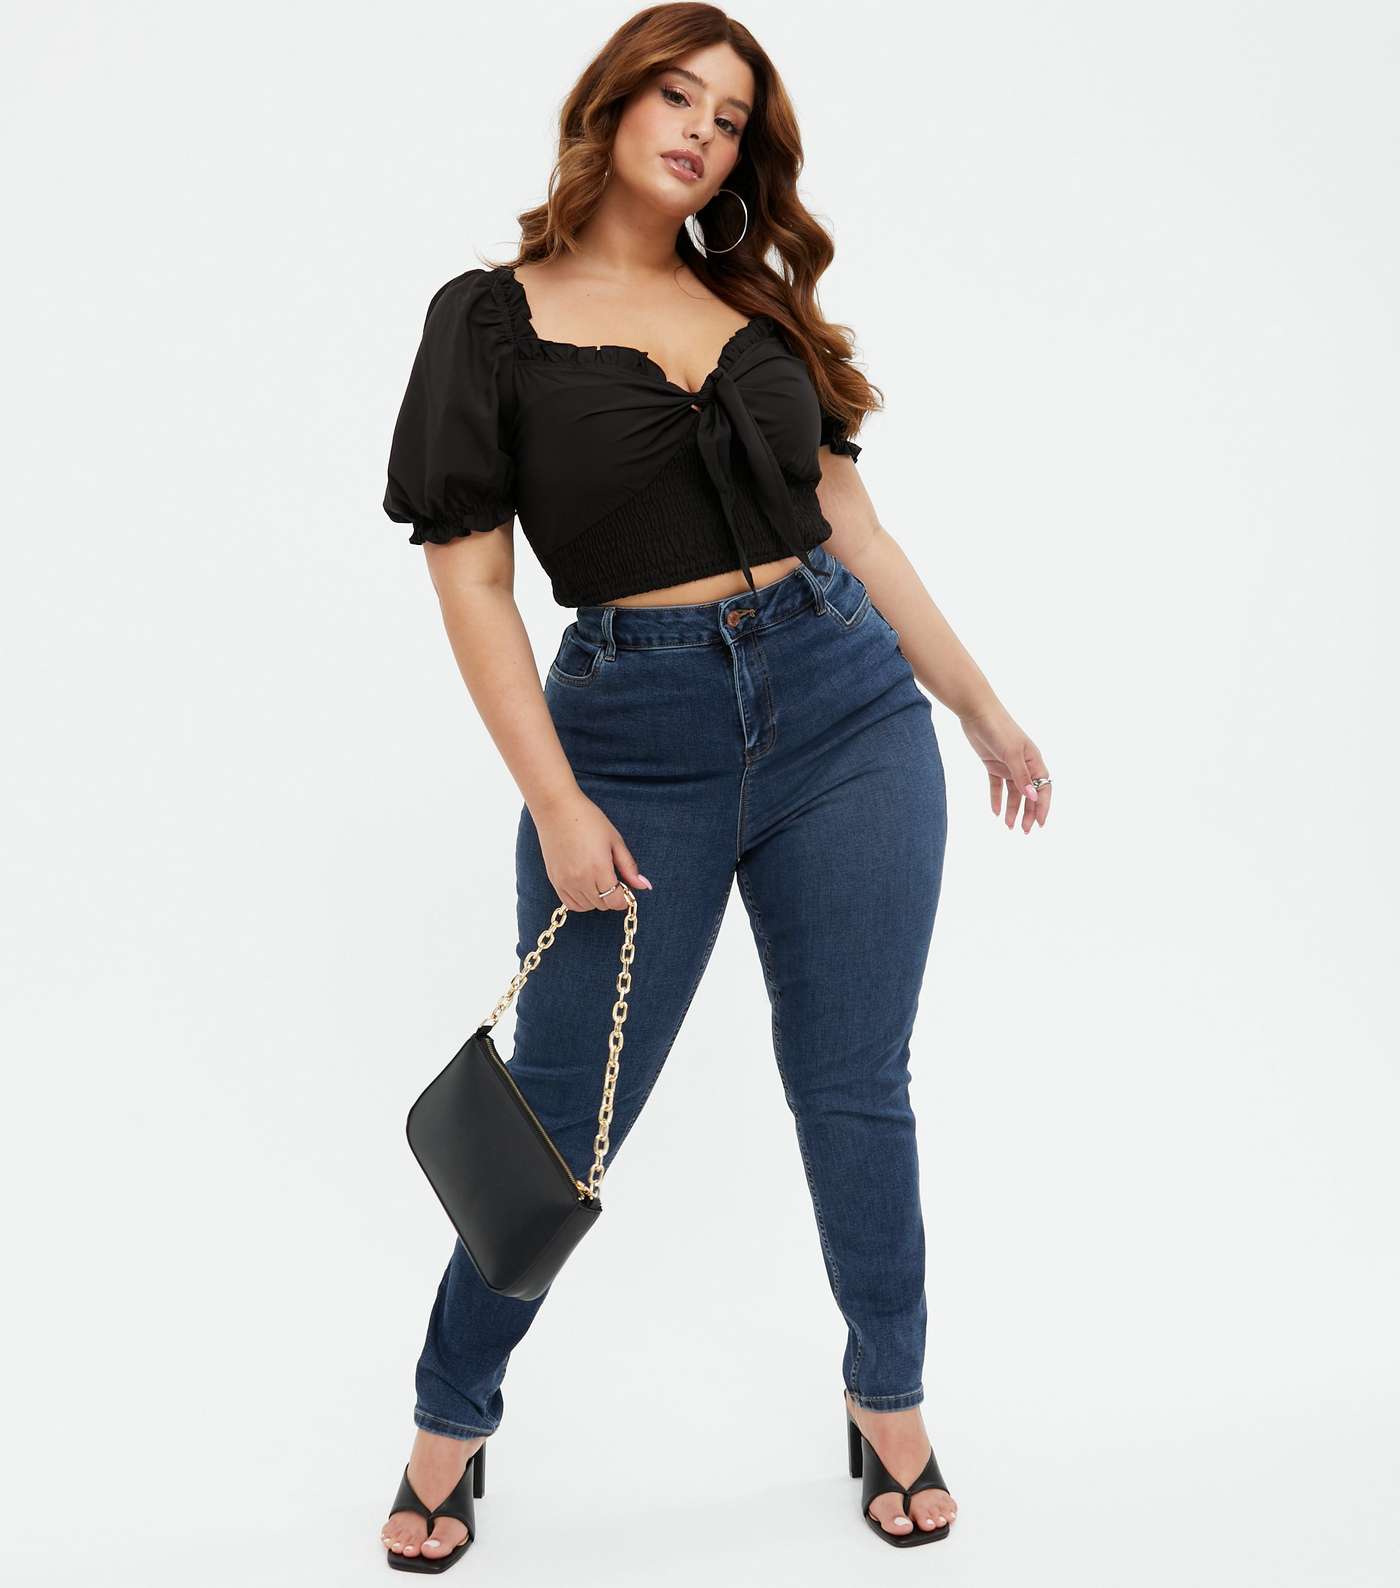 Urban Bliss Curves Black Shirred Tie Front Crop Top Image 2